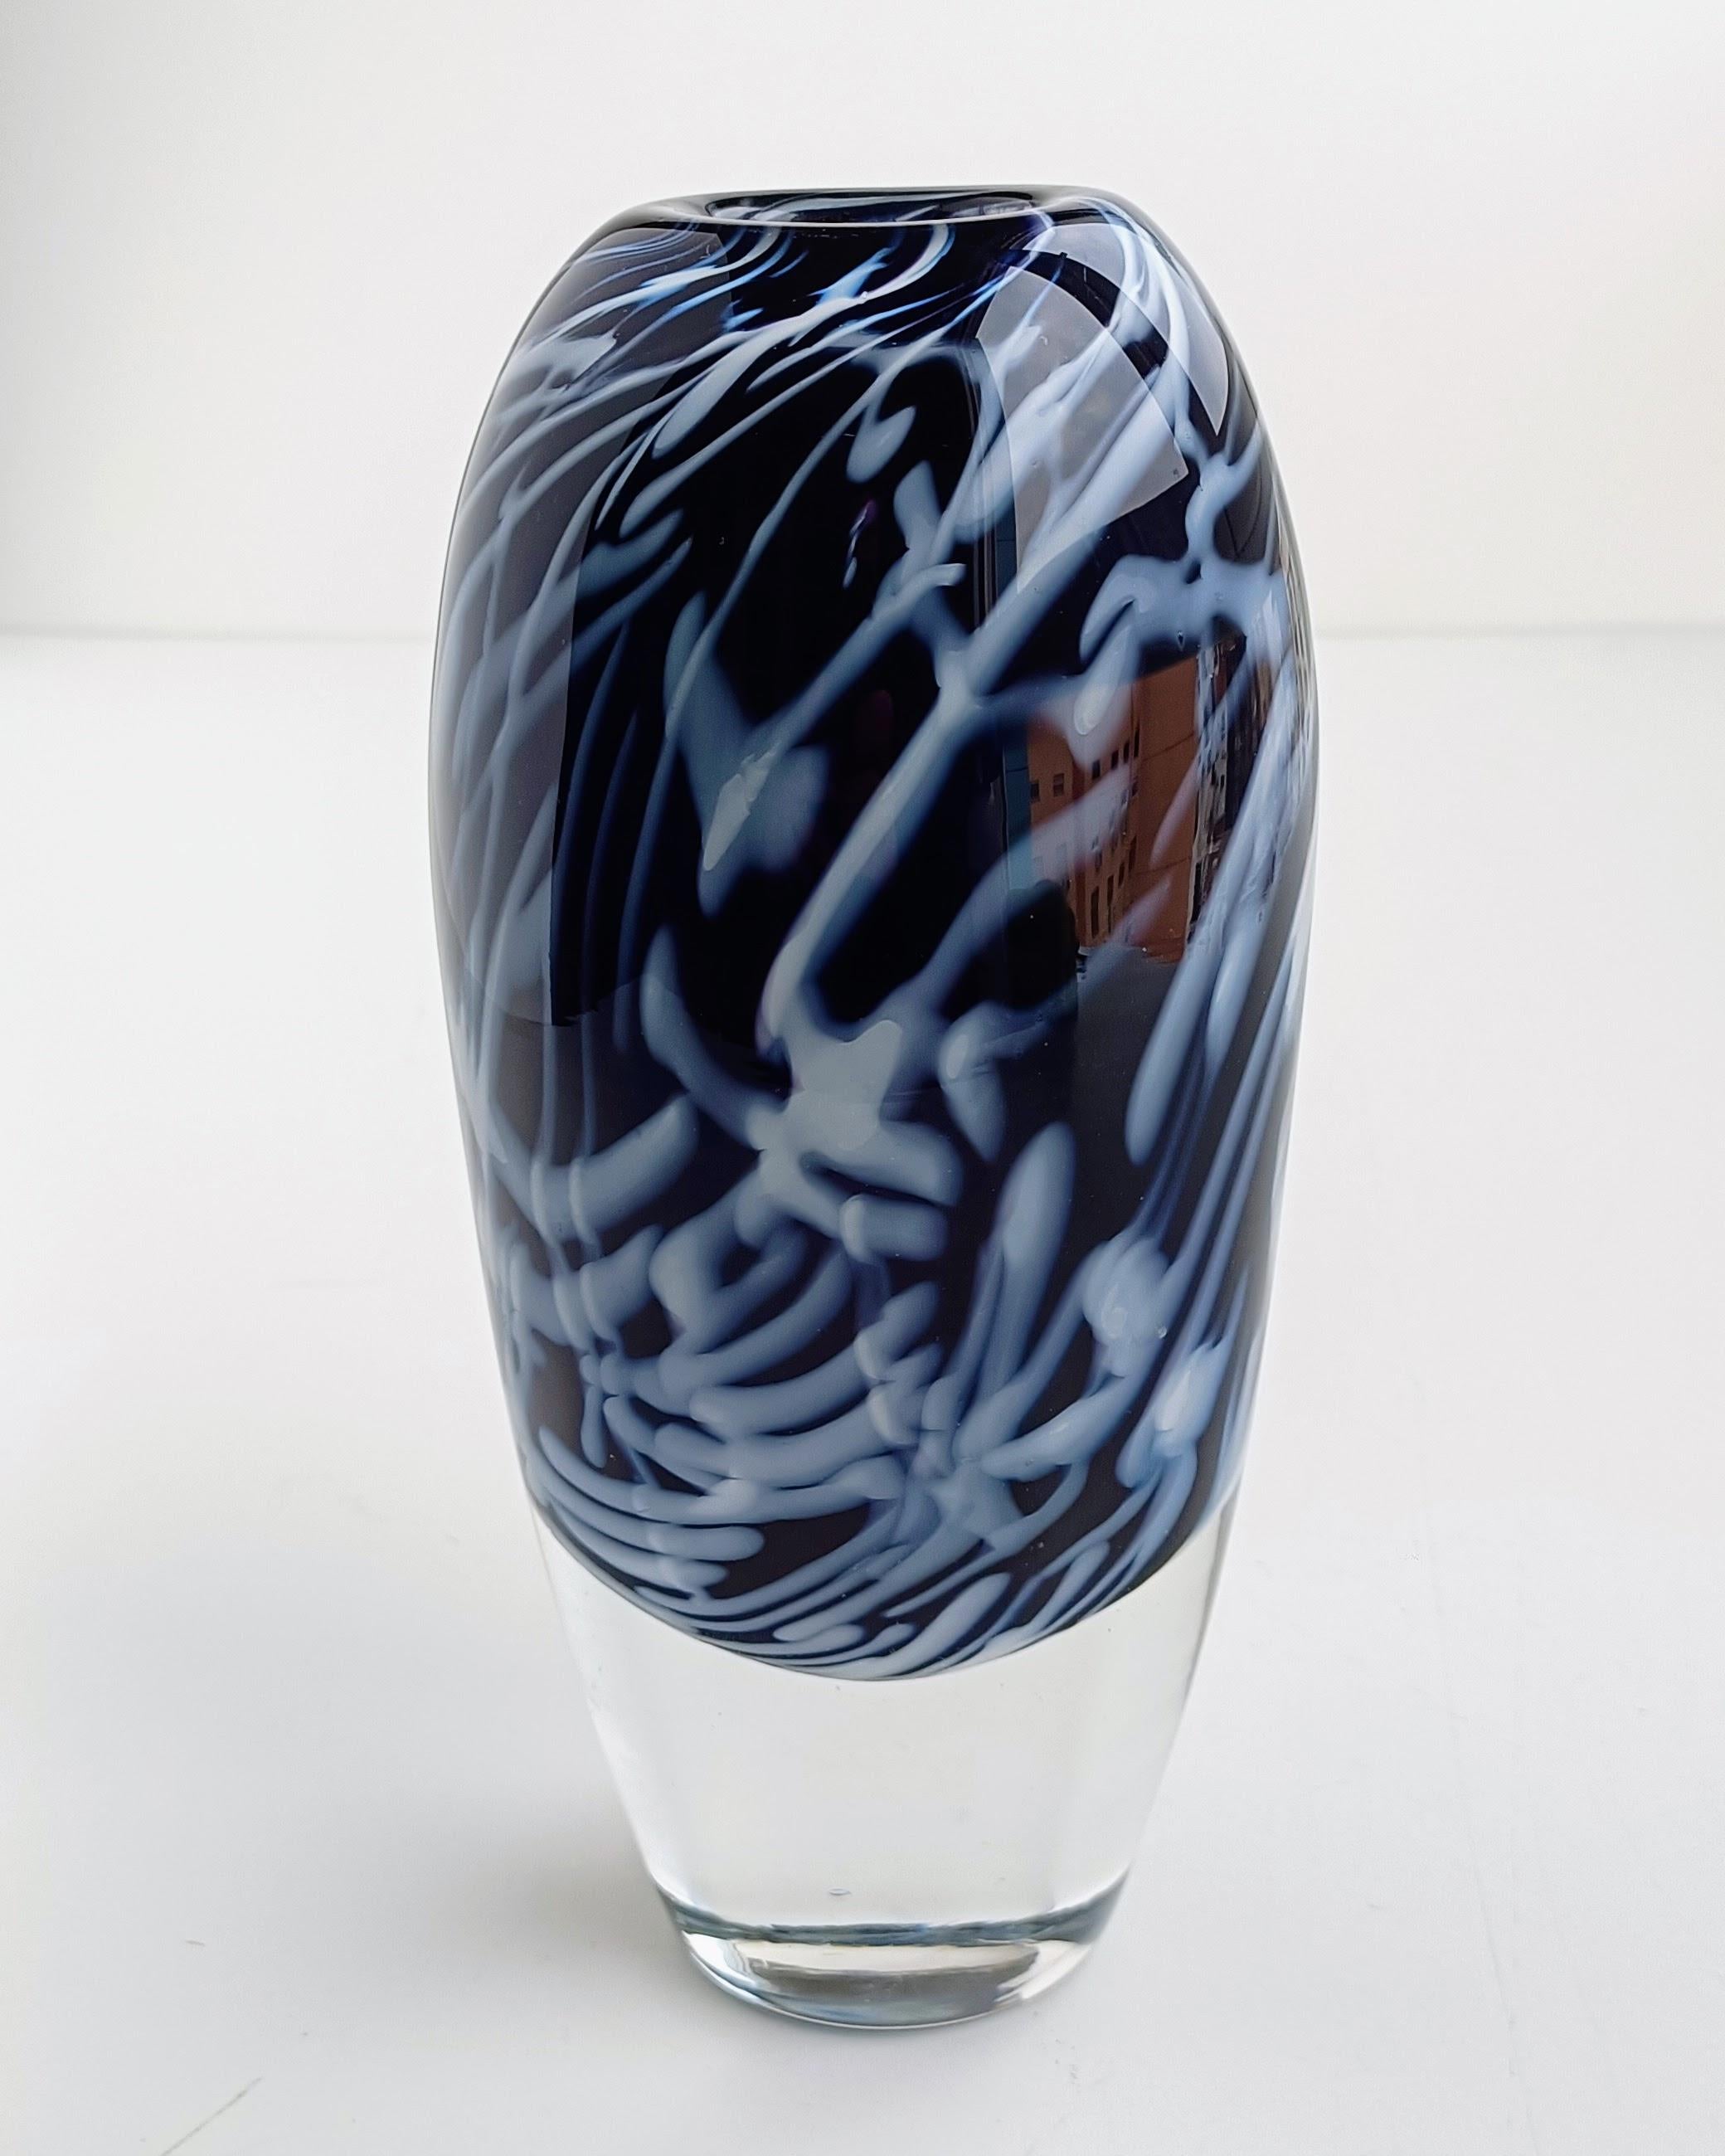 Scandinavian Modern Art Glass Orrefors by Walter Johansson, Signed and Numbered For Sale 2